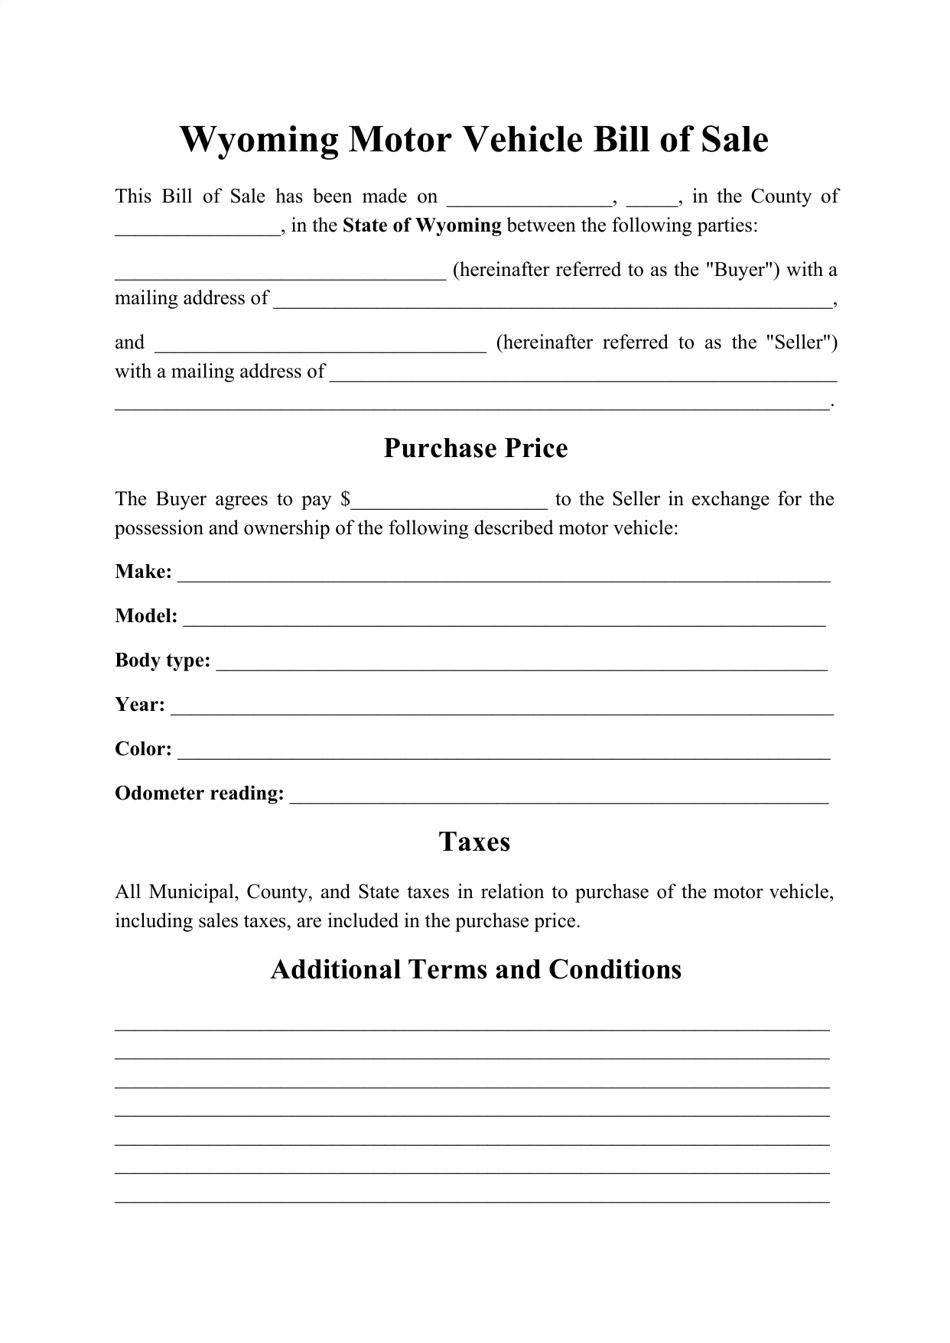 Wyoming Motor Vehicle Bill of Sale Form Fill Out Sign Online and